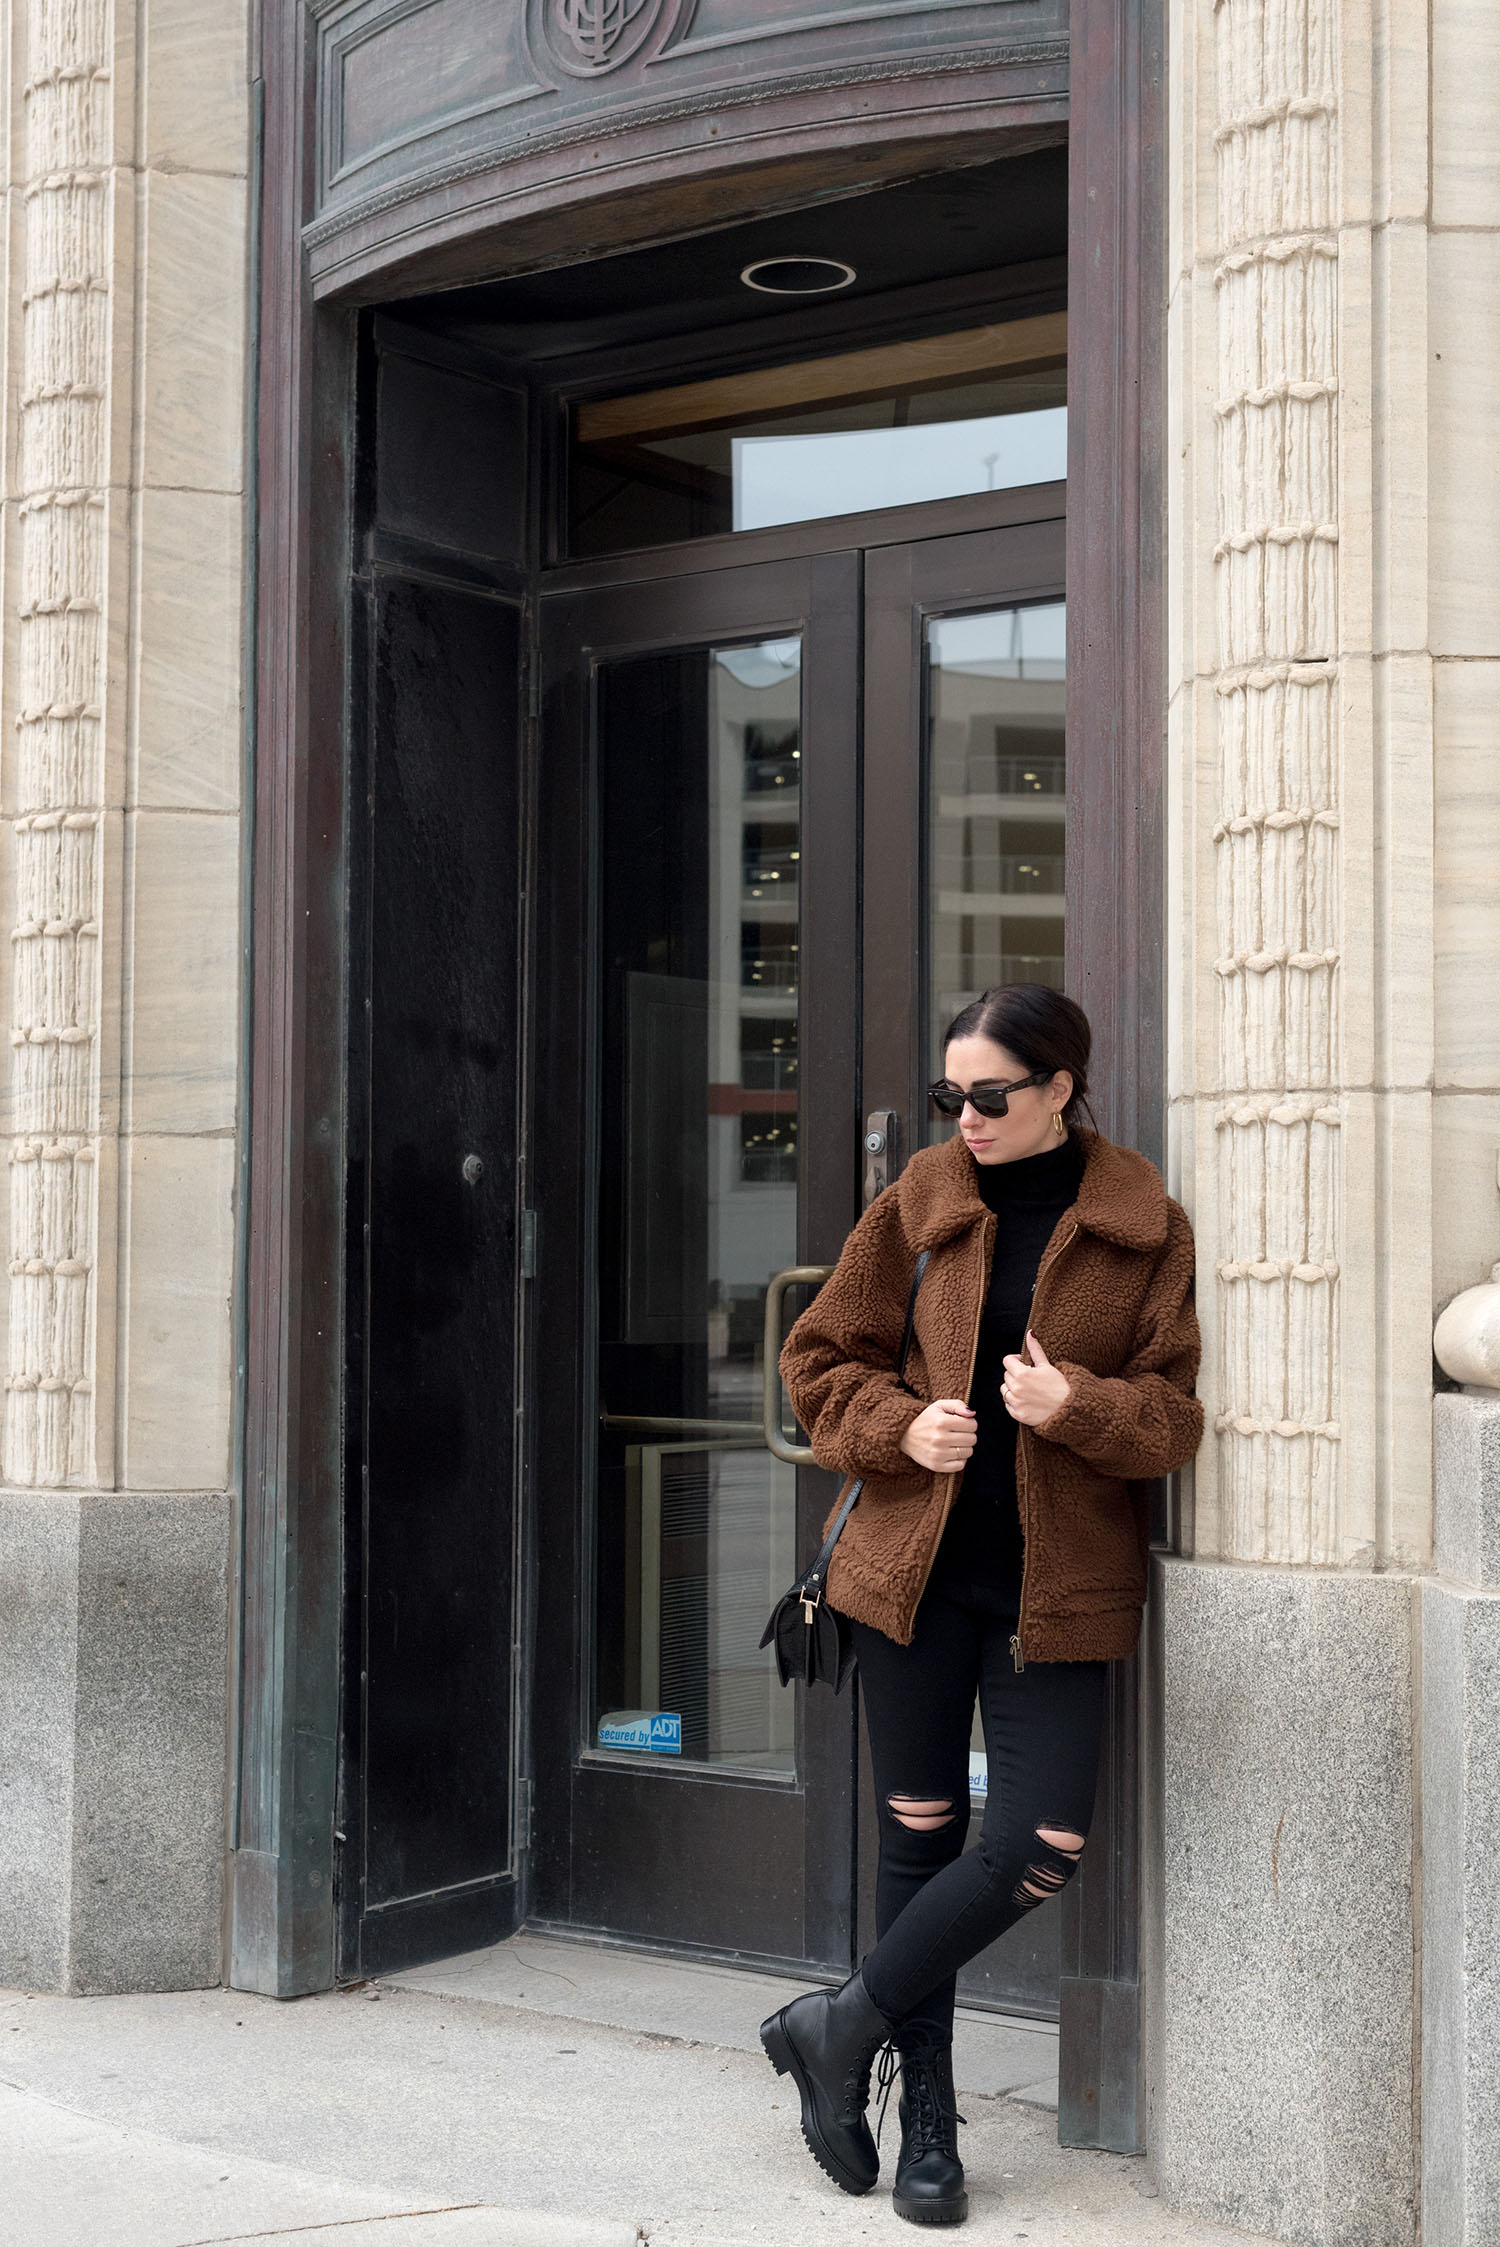 Top Winnipeg fashion blogger Cee Fardoe of Coco & Vera stands outside Birks Jewelers wearing a Garage Clothing teddy coat and Forever 21 combat boots